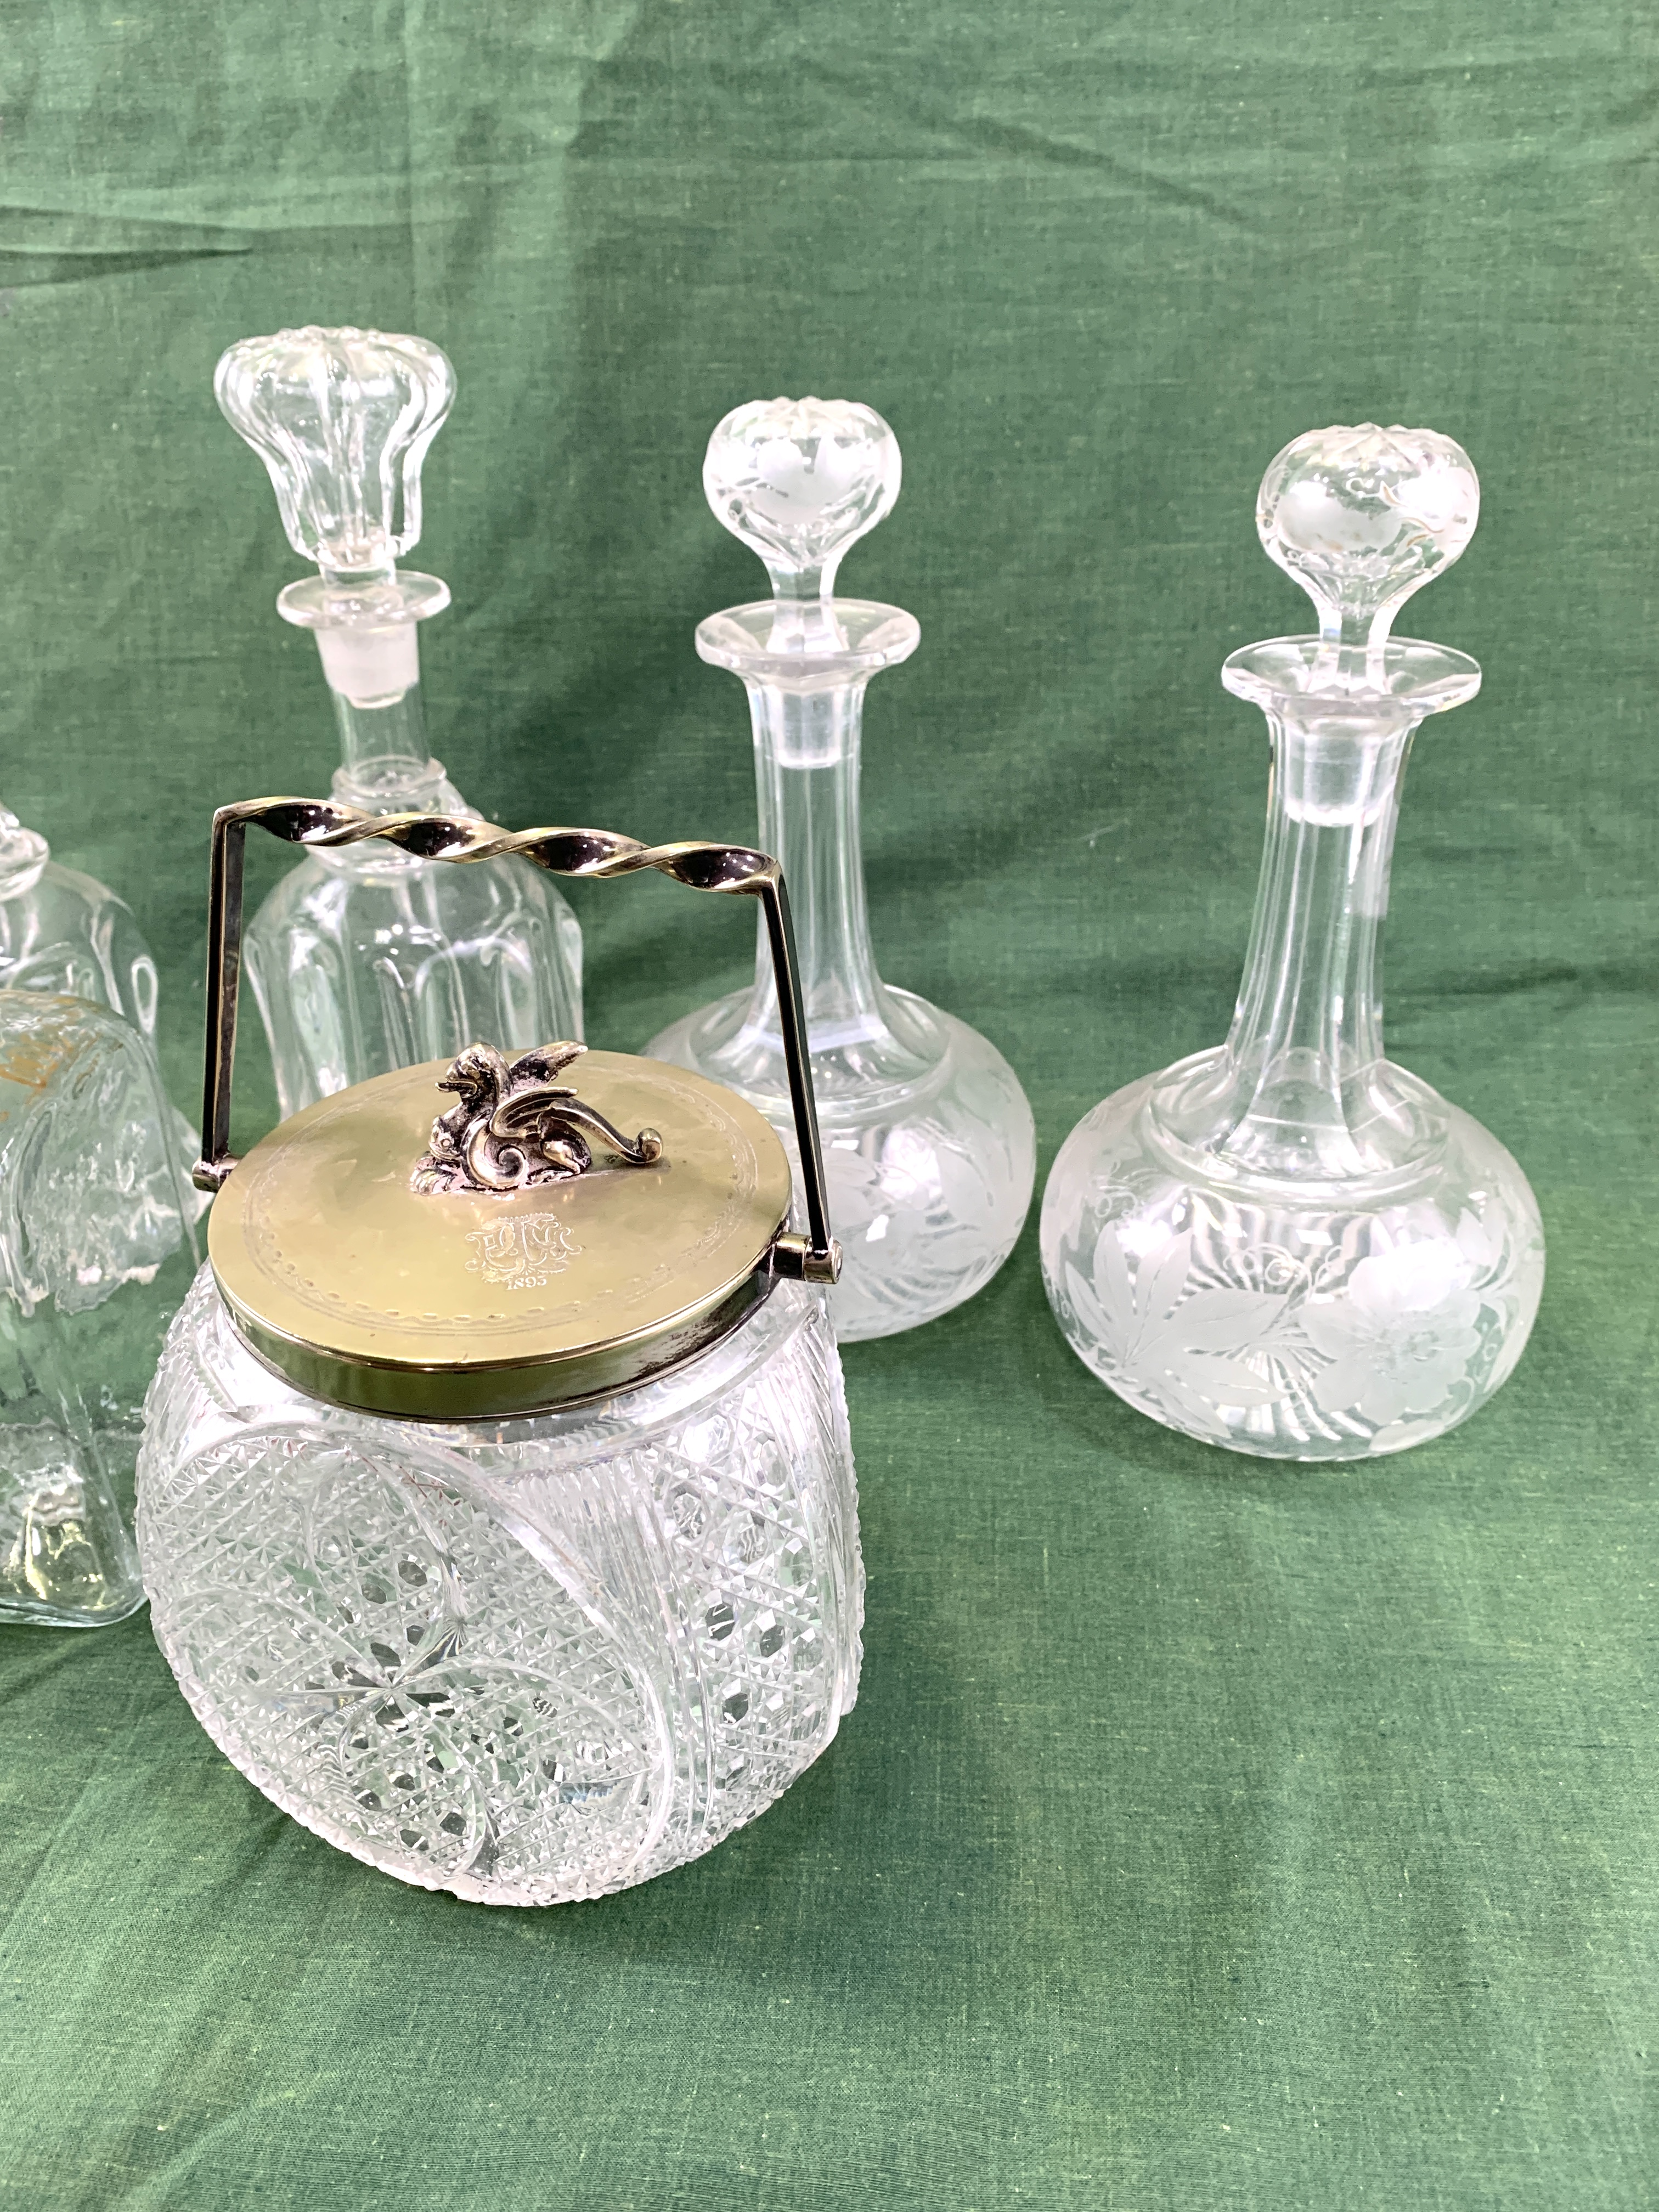 A pair of Victorian decanters, a pair of Edwardian decanters, and a cut glass biscuit barrel - Image 5 of 6